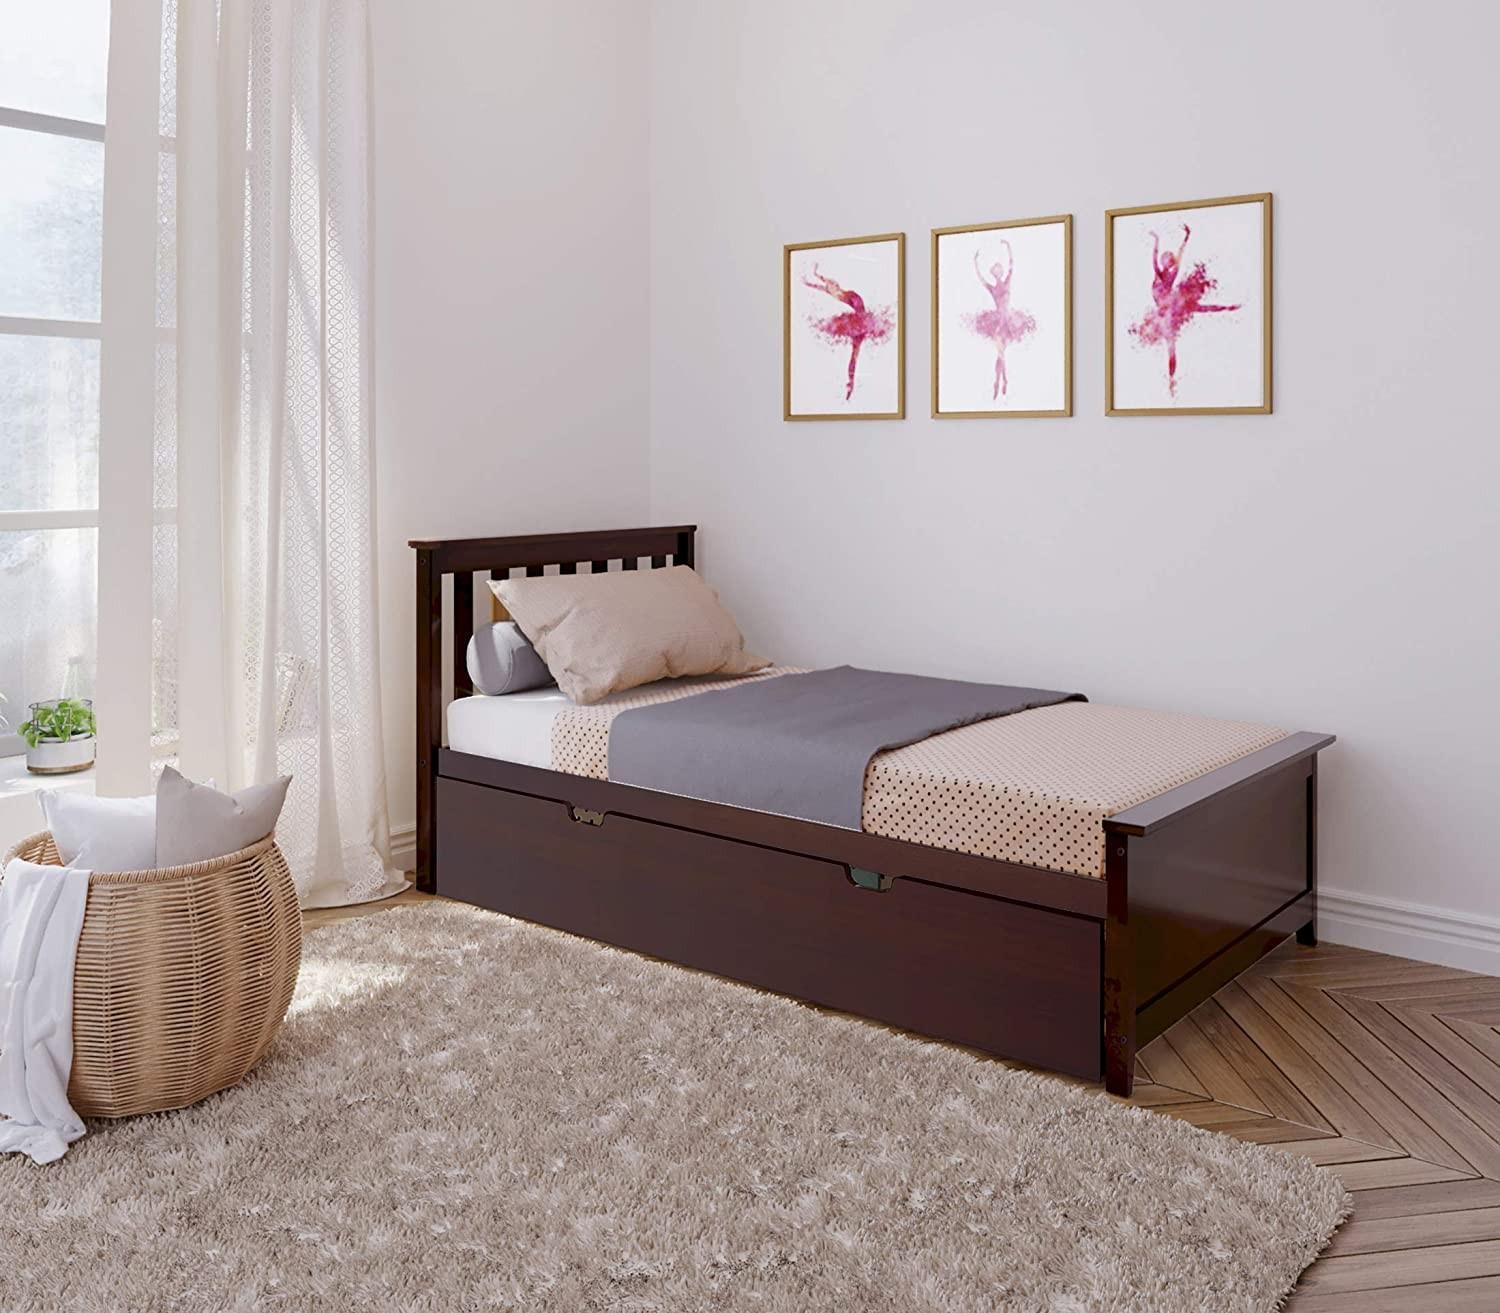 SOLID WOOD TWIN SIZE  PLATFORM BED IN ESPRESSO FINISH WITH TRUNDLE BED